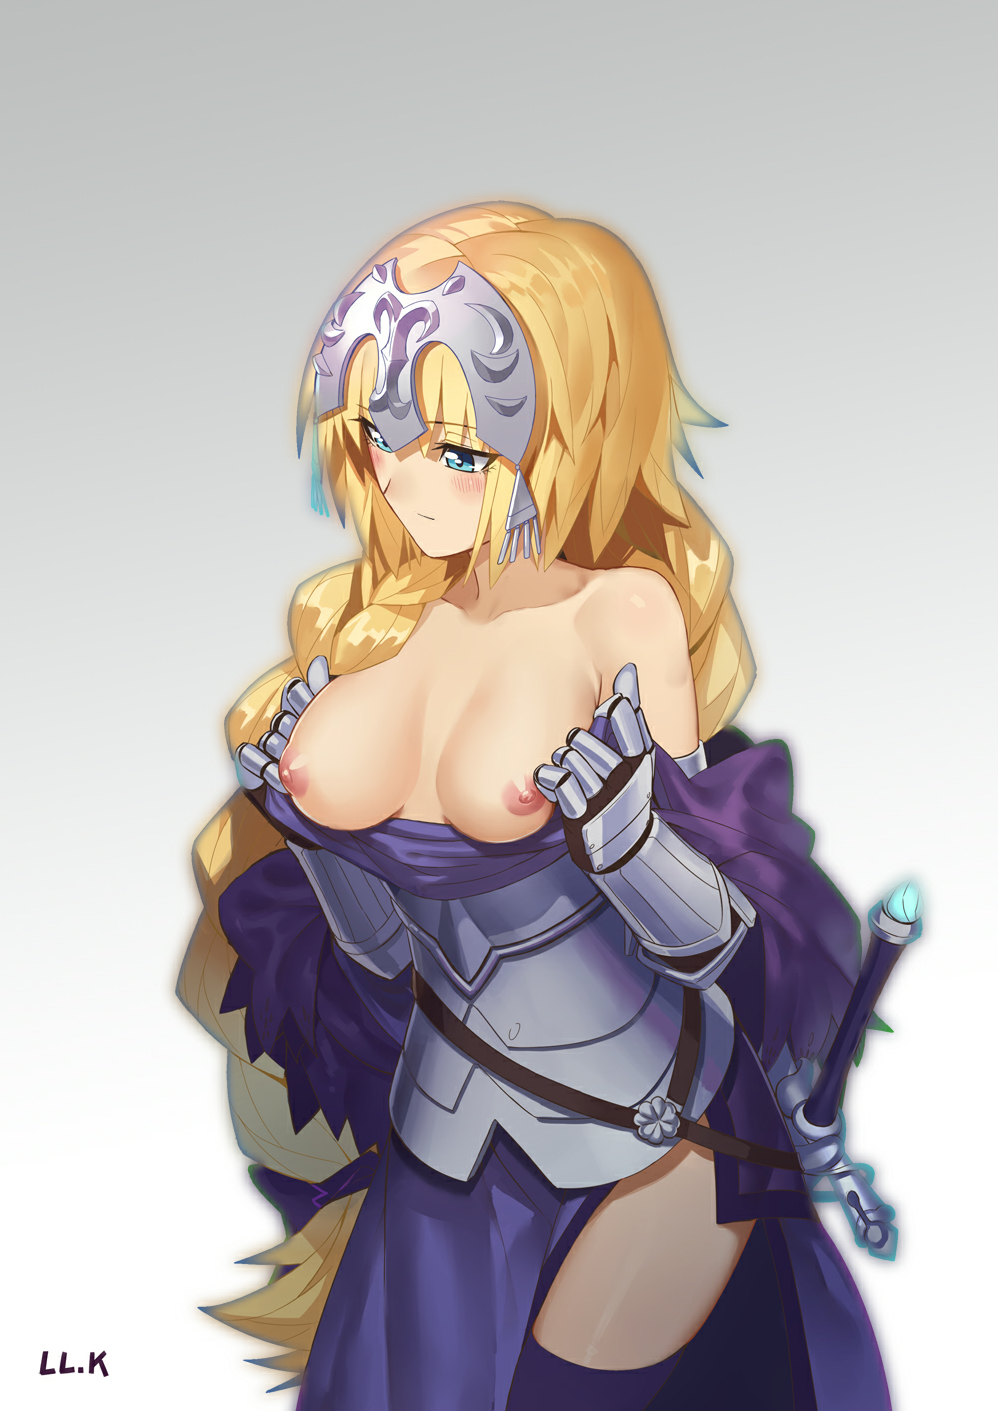 armor armored_dress blonde_hair bow braid breasts dress fate/apocrypha fate_(series) female gauntlets hairbow headpiece lolik_(artist) long_hair nipples ruler_(fate/apocrypha) skirt solo sword thighhighs weapon